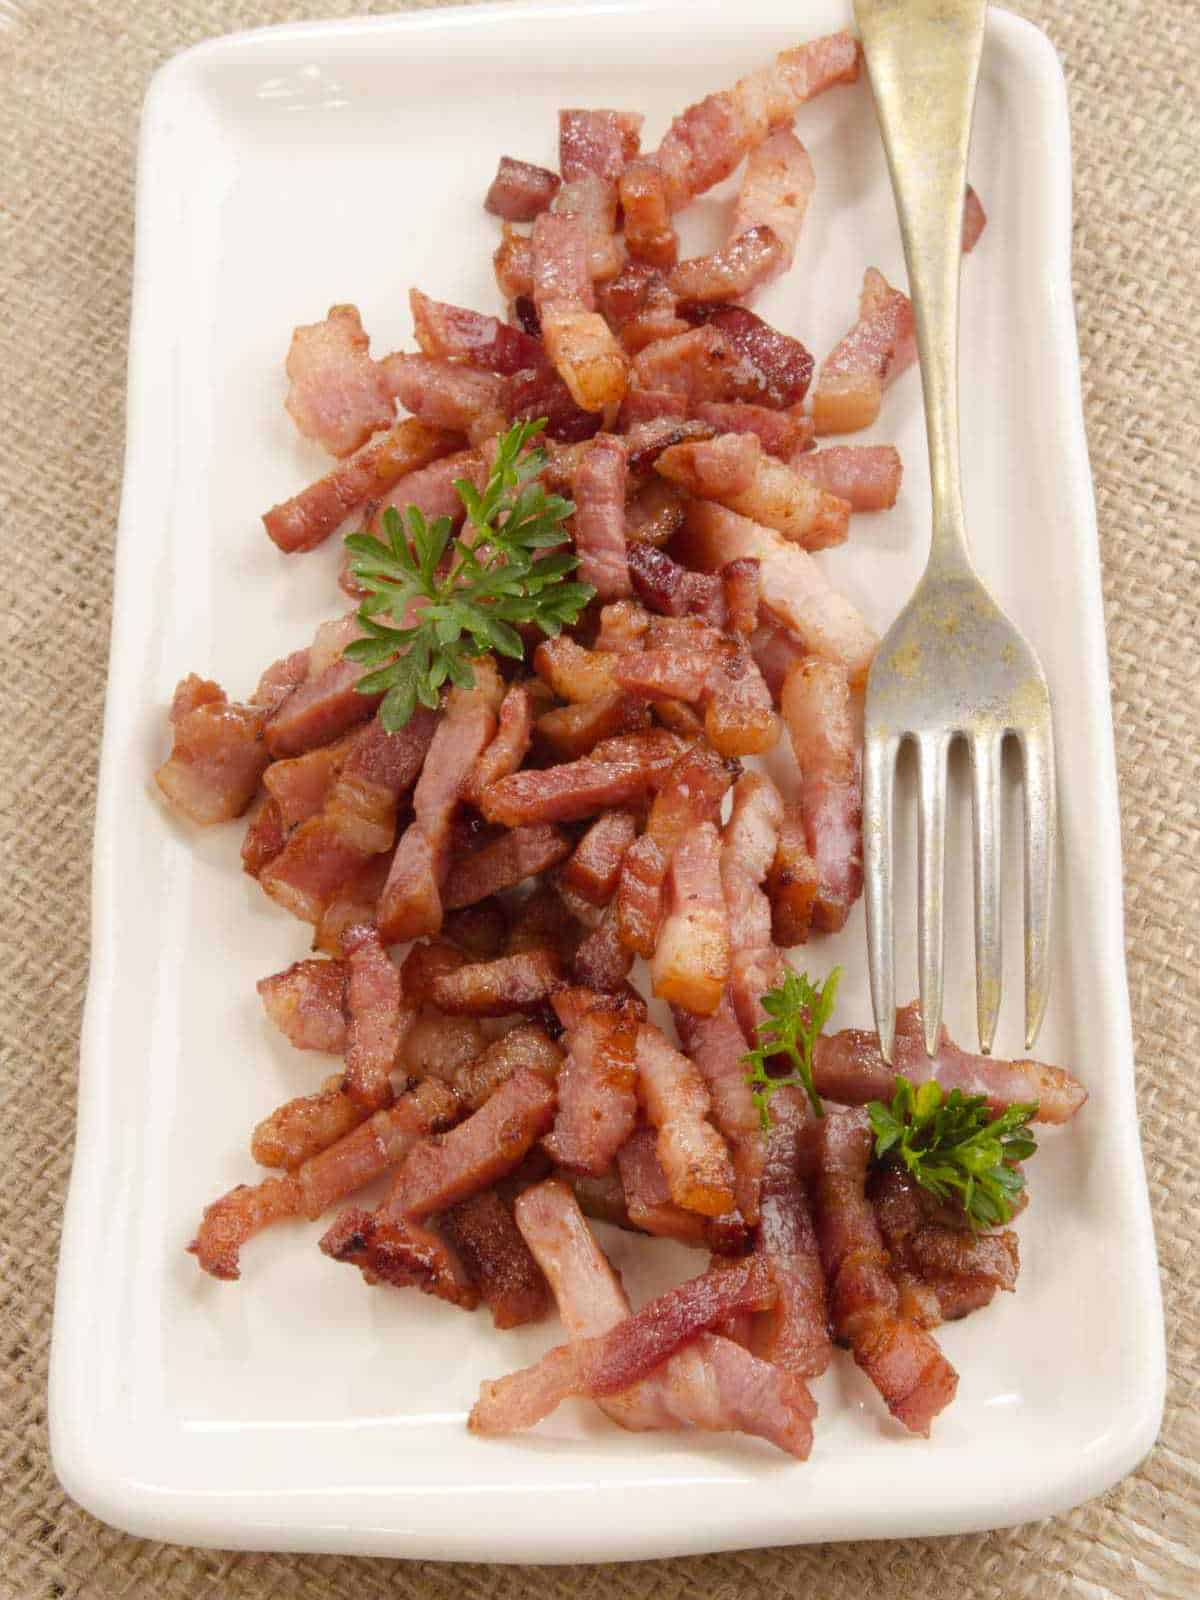 grilled bacon bits on a plate with parsley and fork.